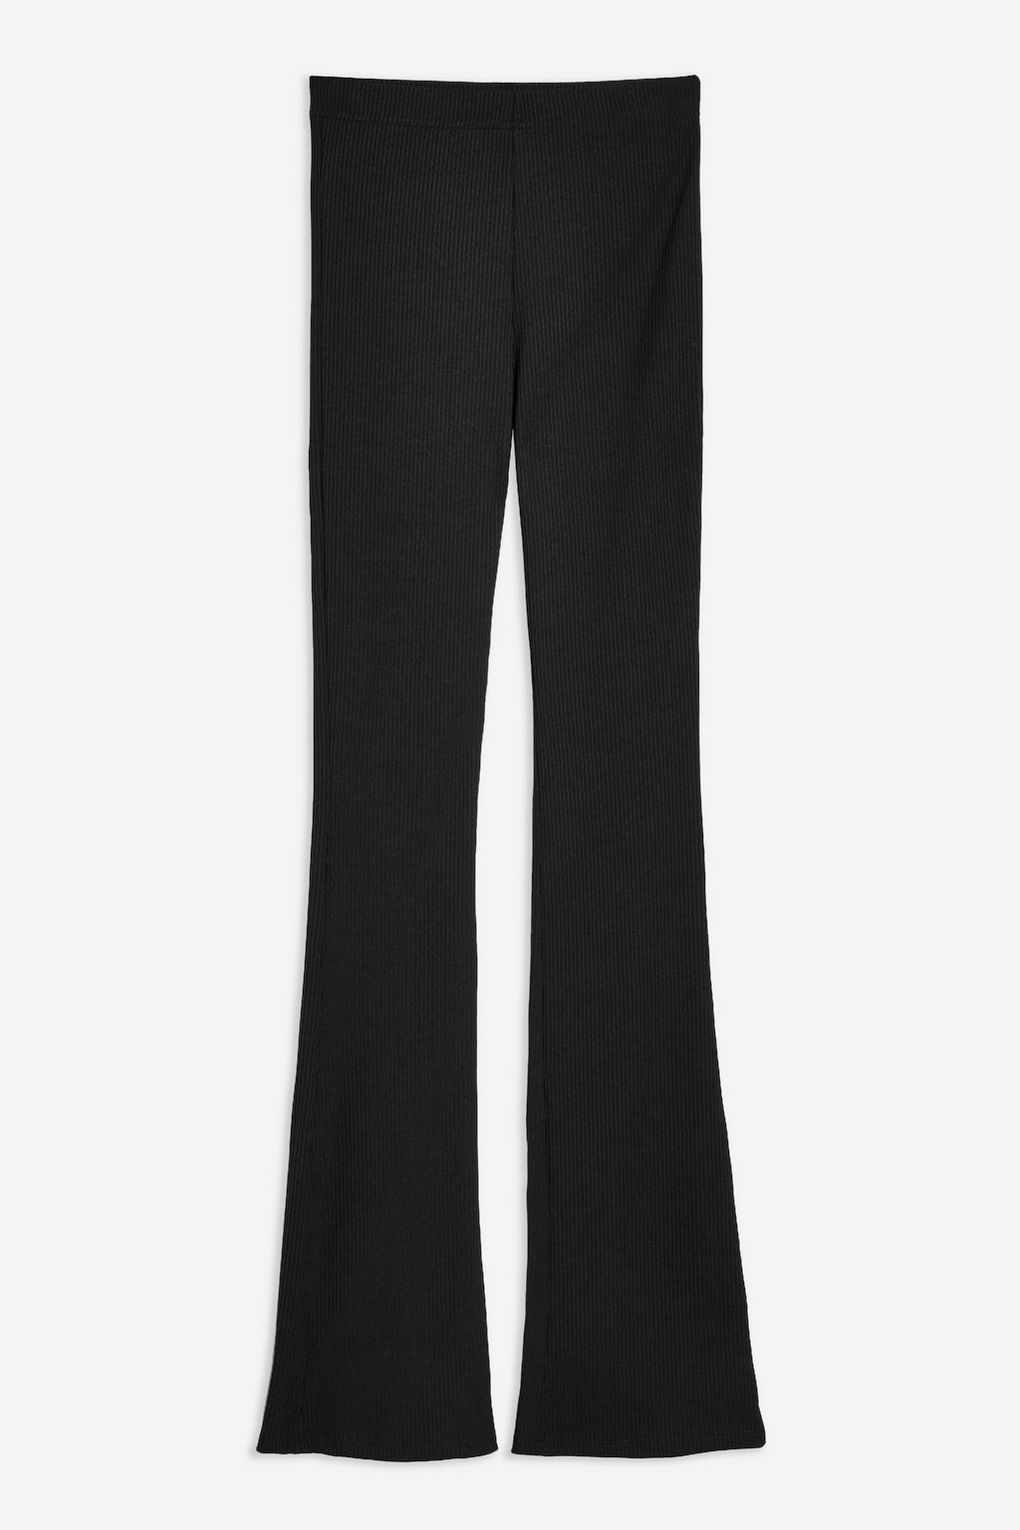 Best Corduroy Pants with Pockets: Topshop Kort High Waist Corduroy Pants |  13 Corduroy Pants Our Editors Are Loving For Fall | POPSUGAR Fashion UK  Photo 9